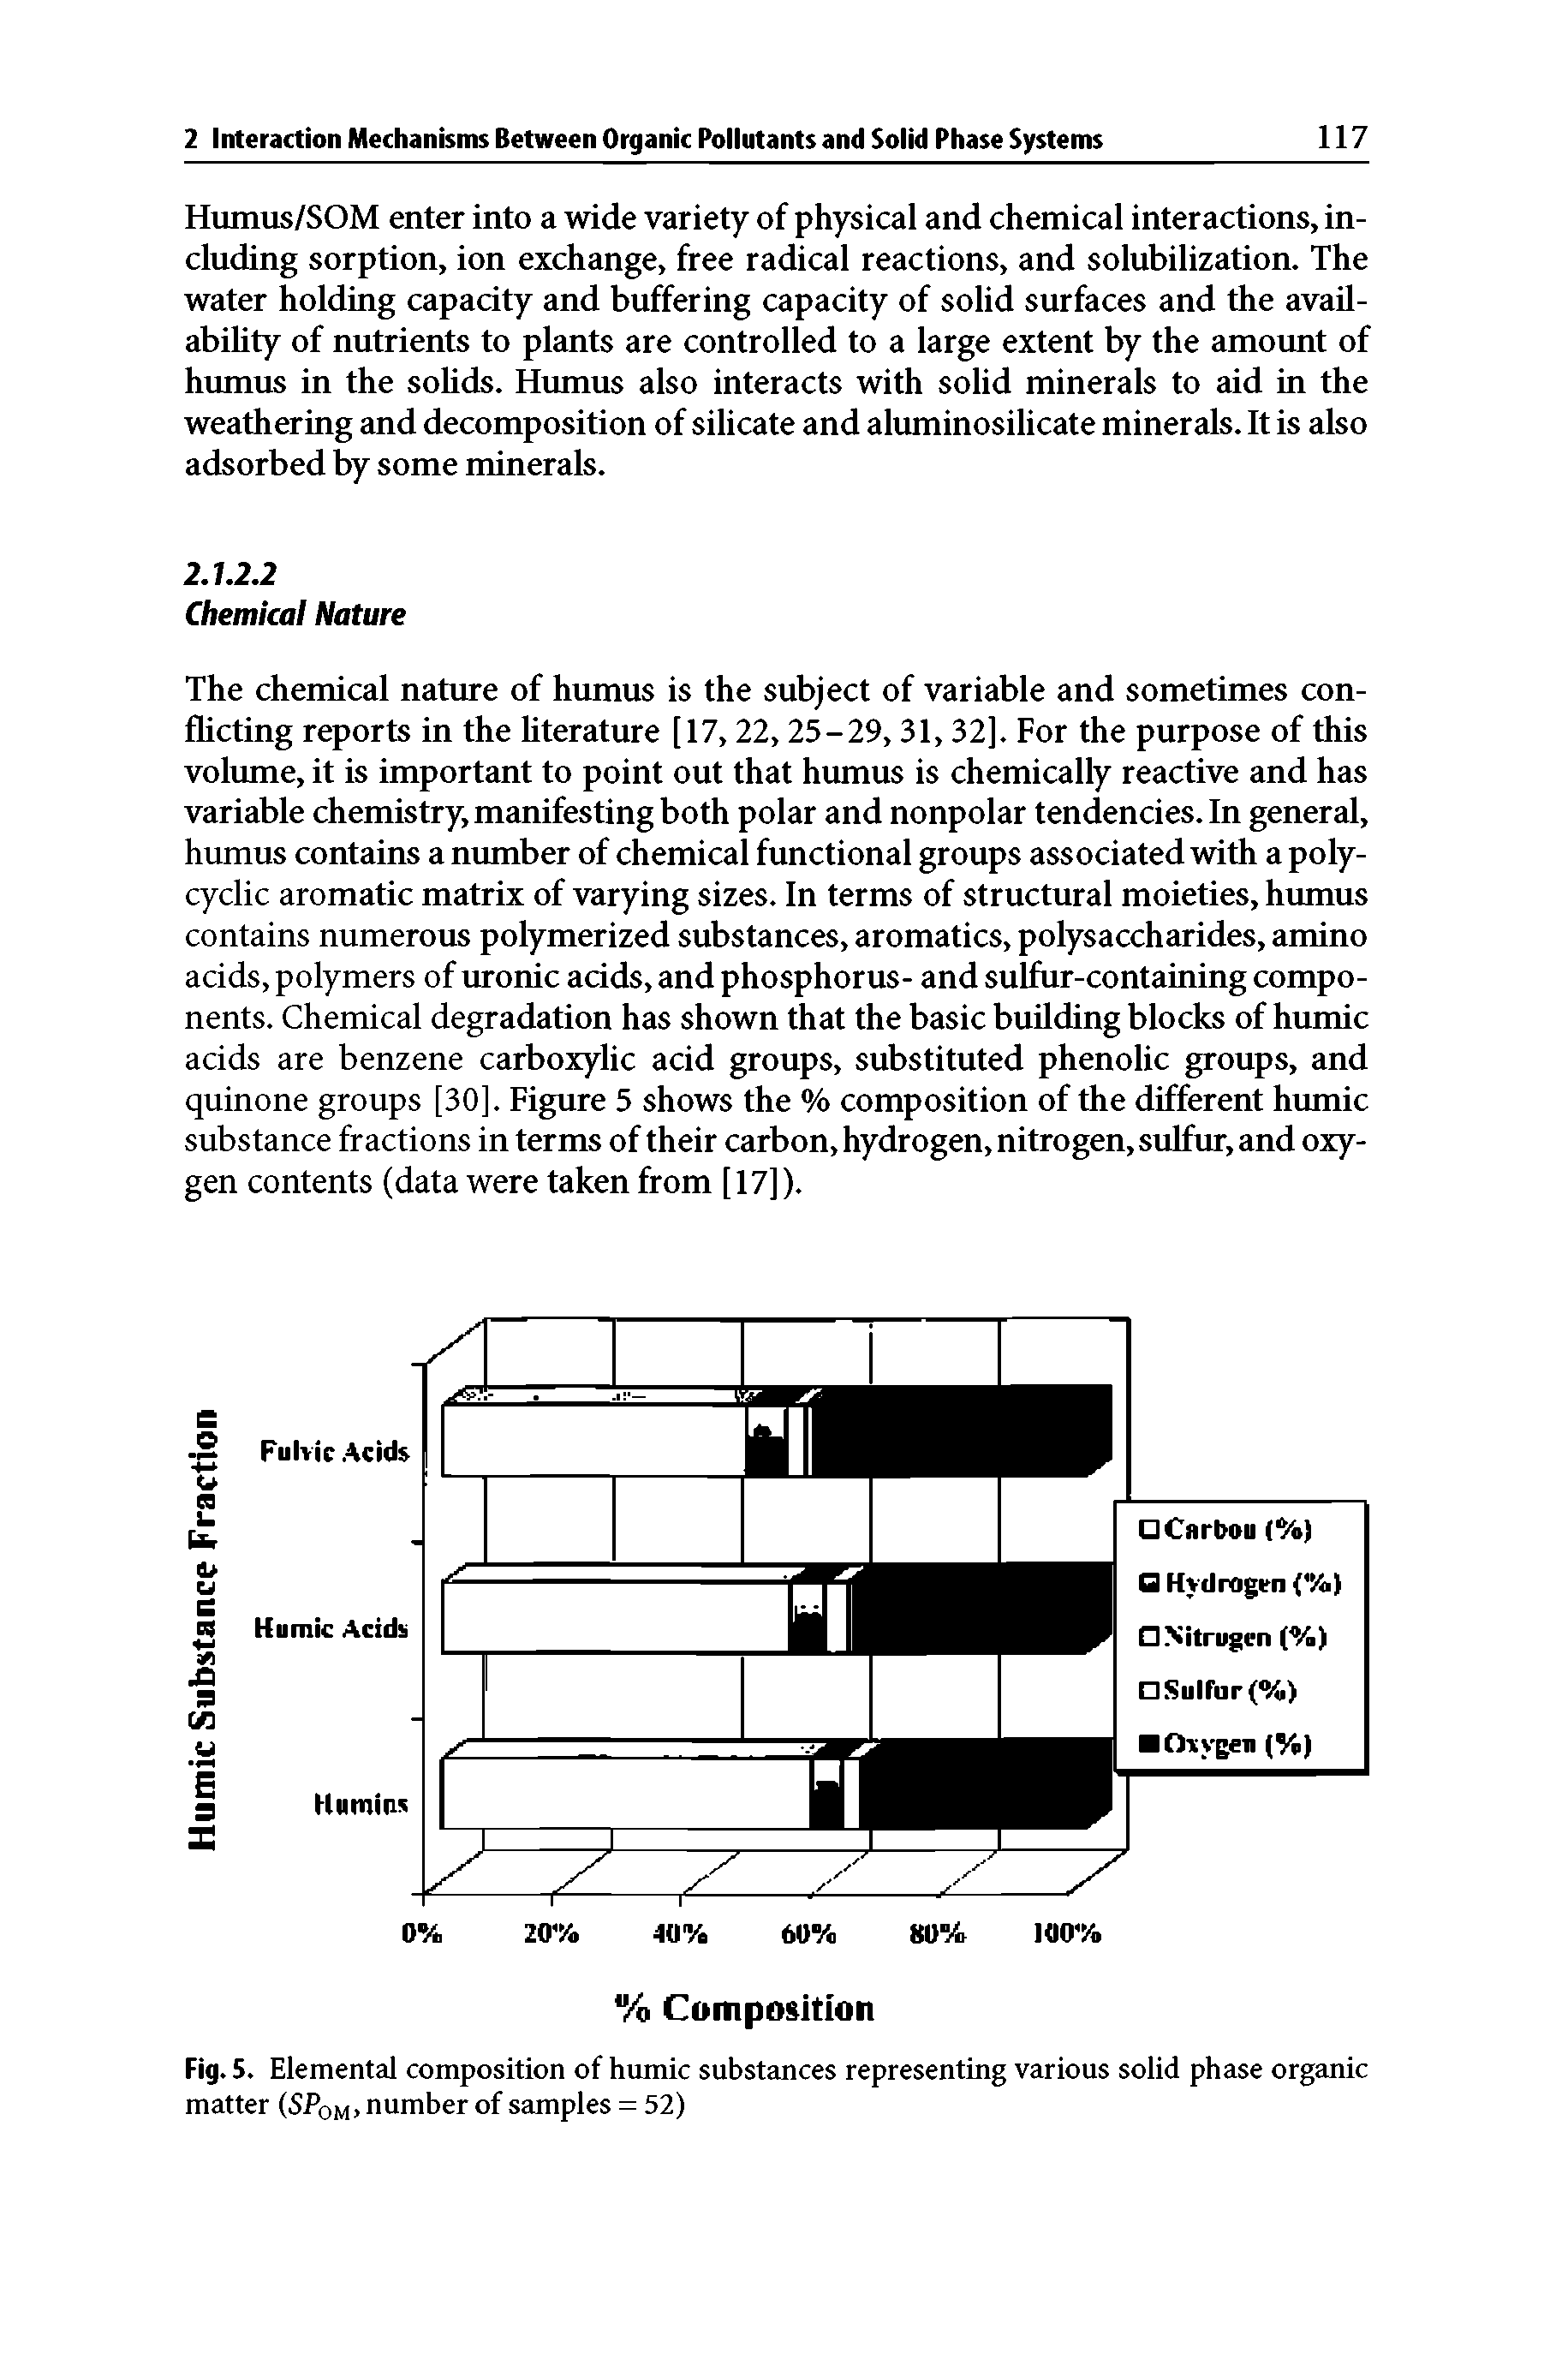 Fig. 5. Elemental composition of humic substances representing various solid phase organic matter (SP0M> number of samples = 52)...